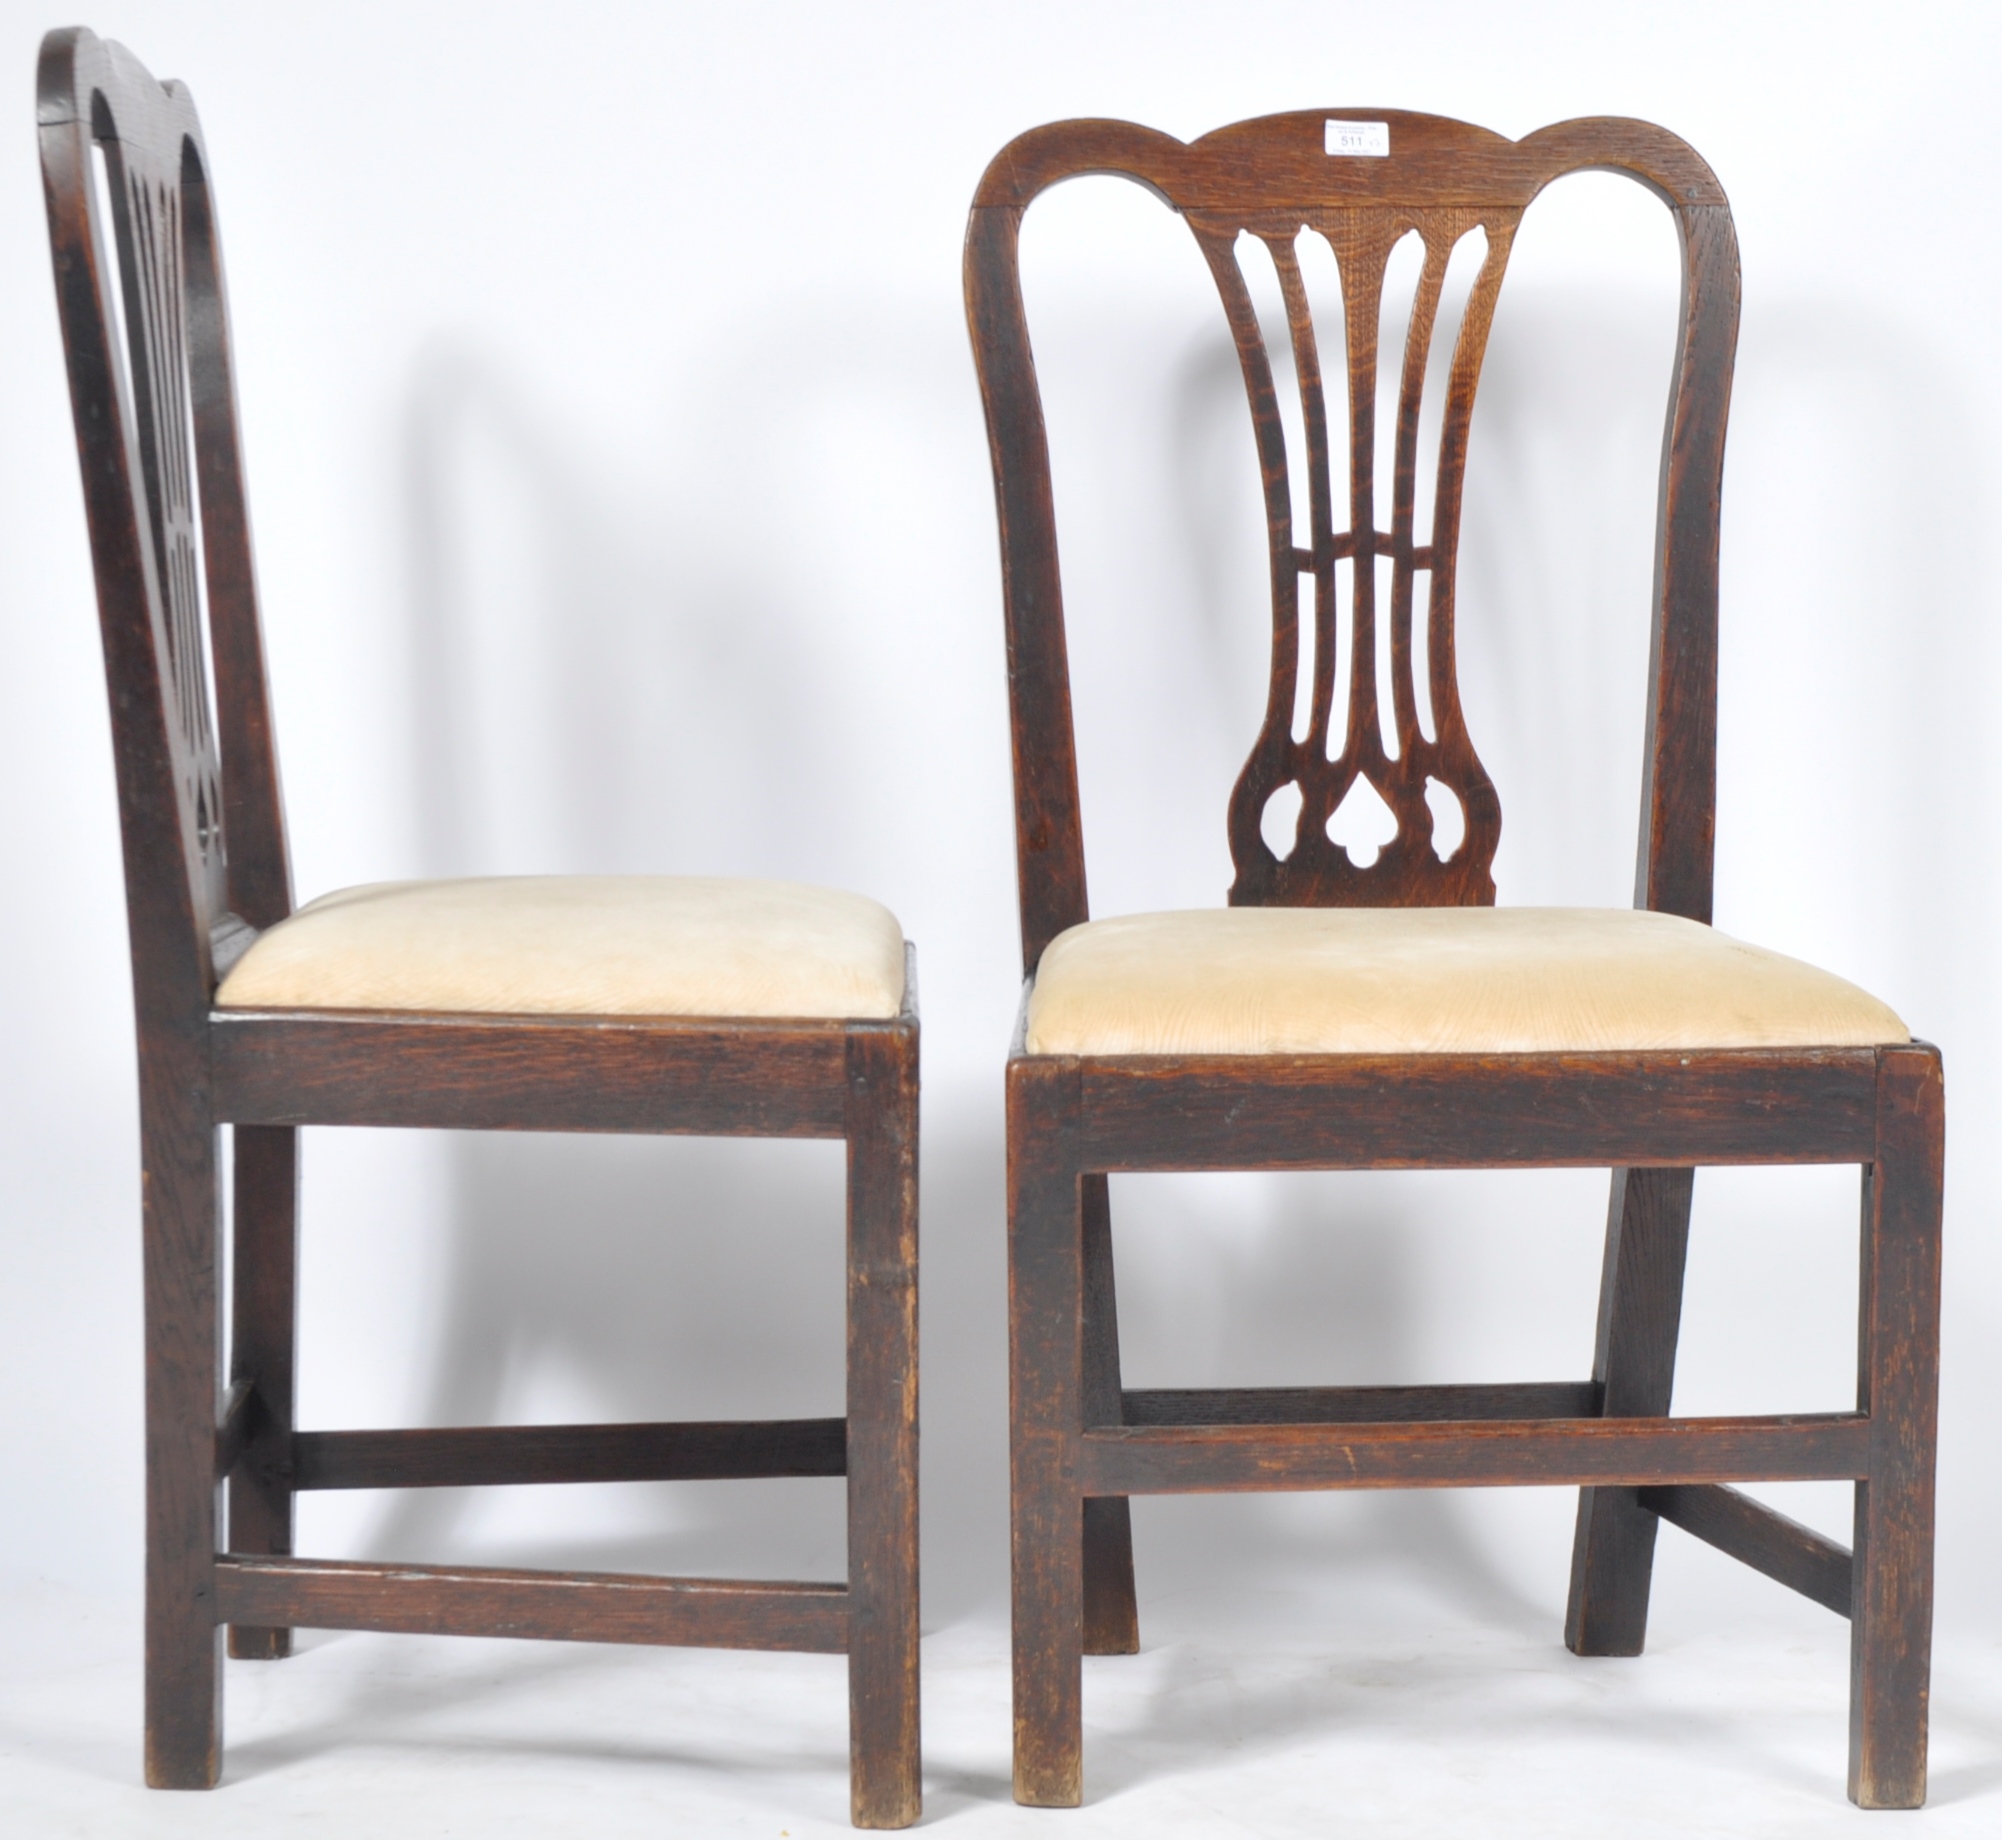 PAIR OF 18TH CENTURY CHIPPENDALE INFLUENCE ELM & OAK CHAIRS - Image 5 of 6